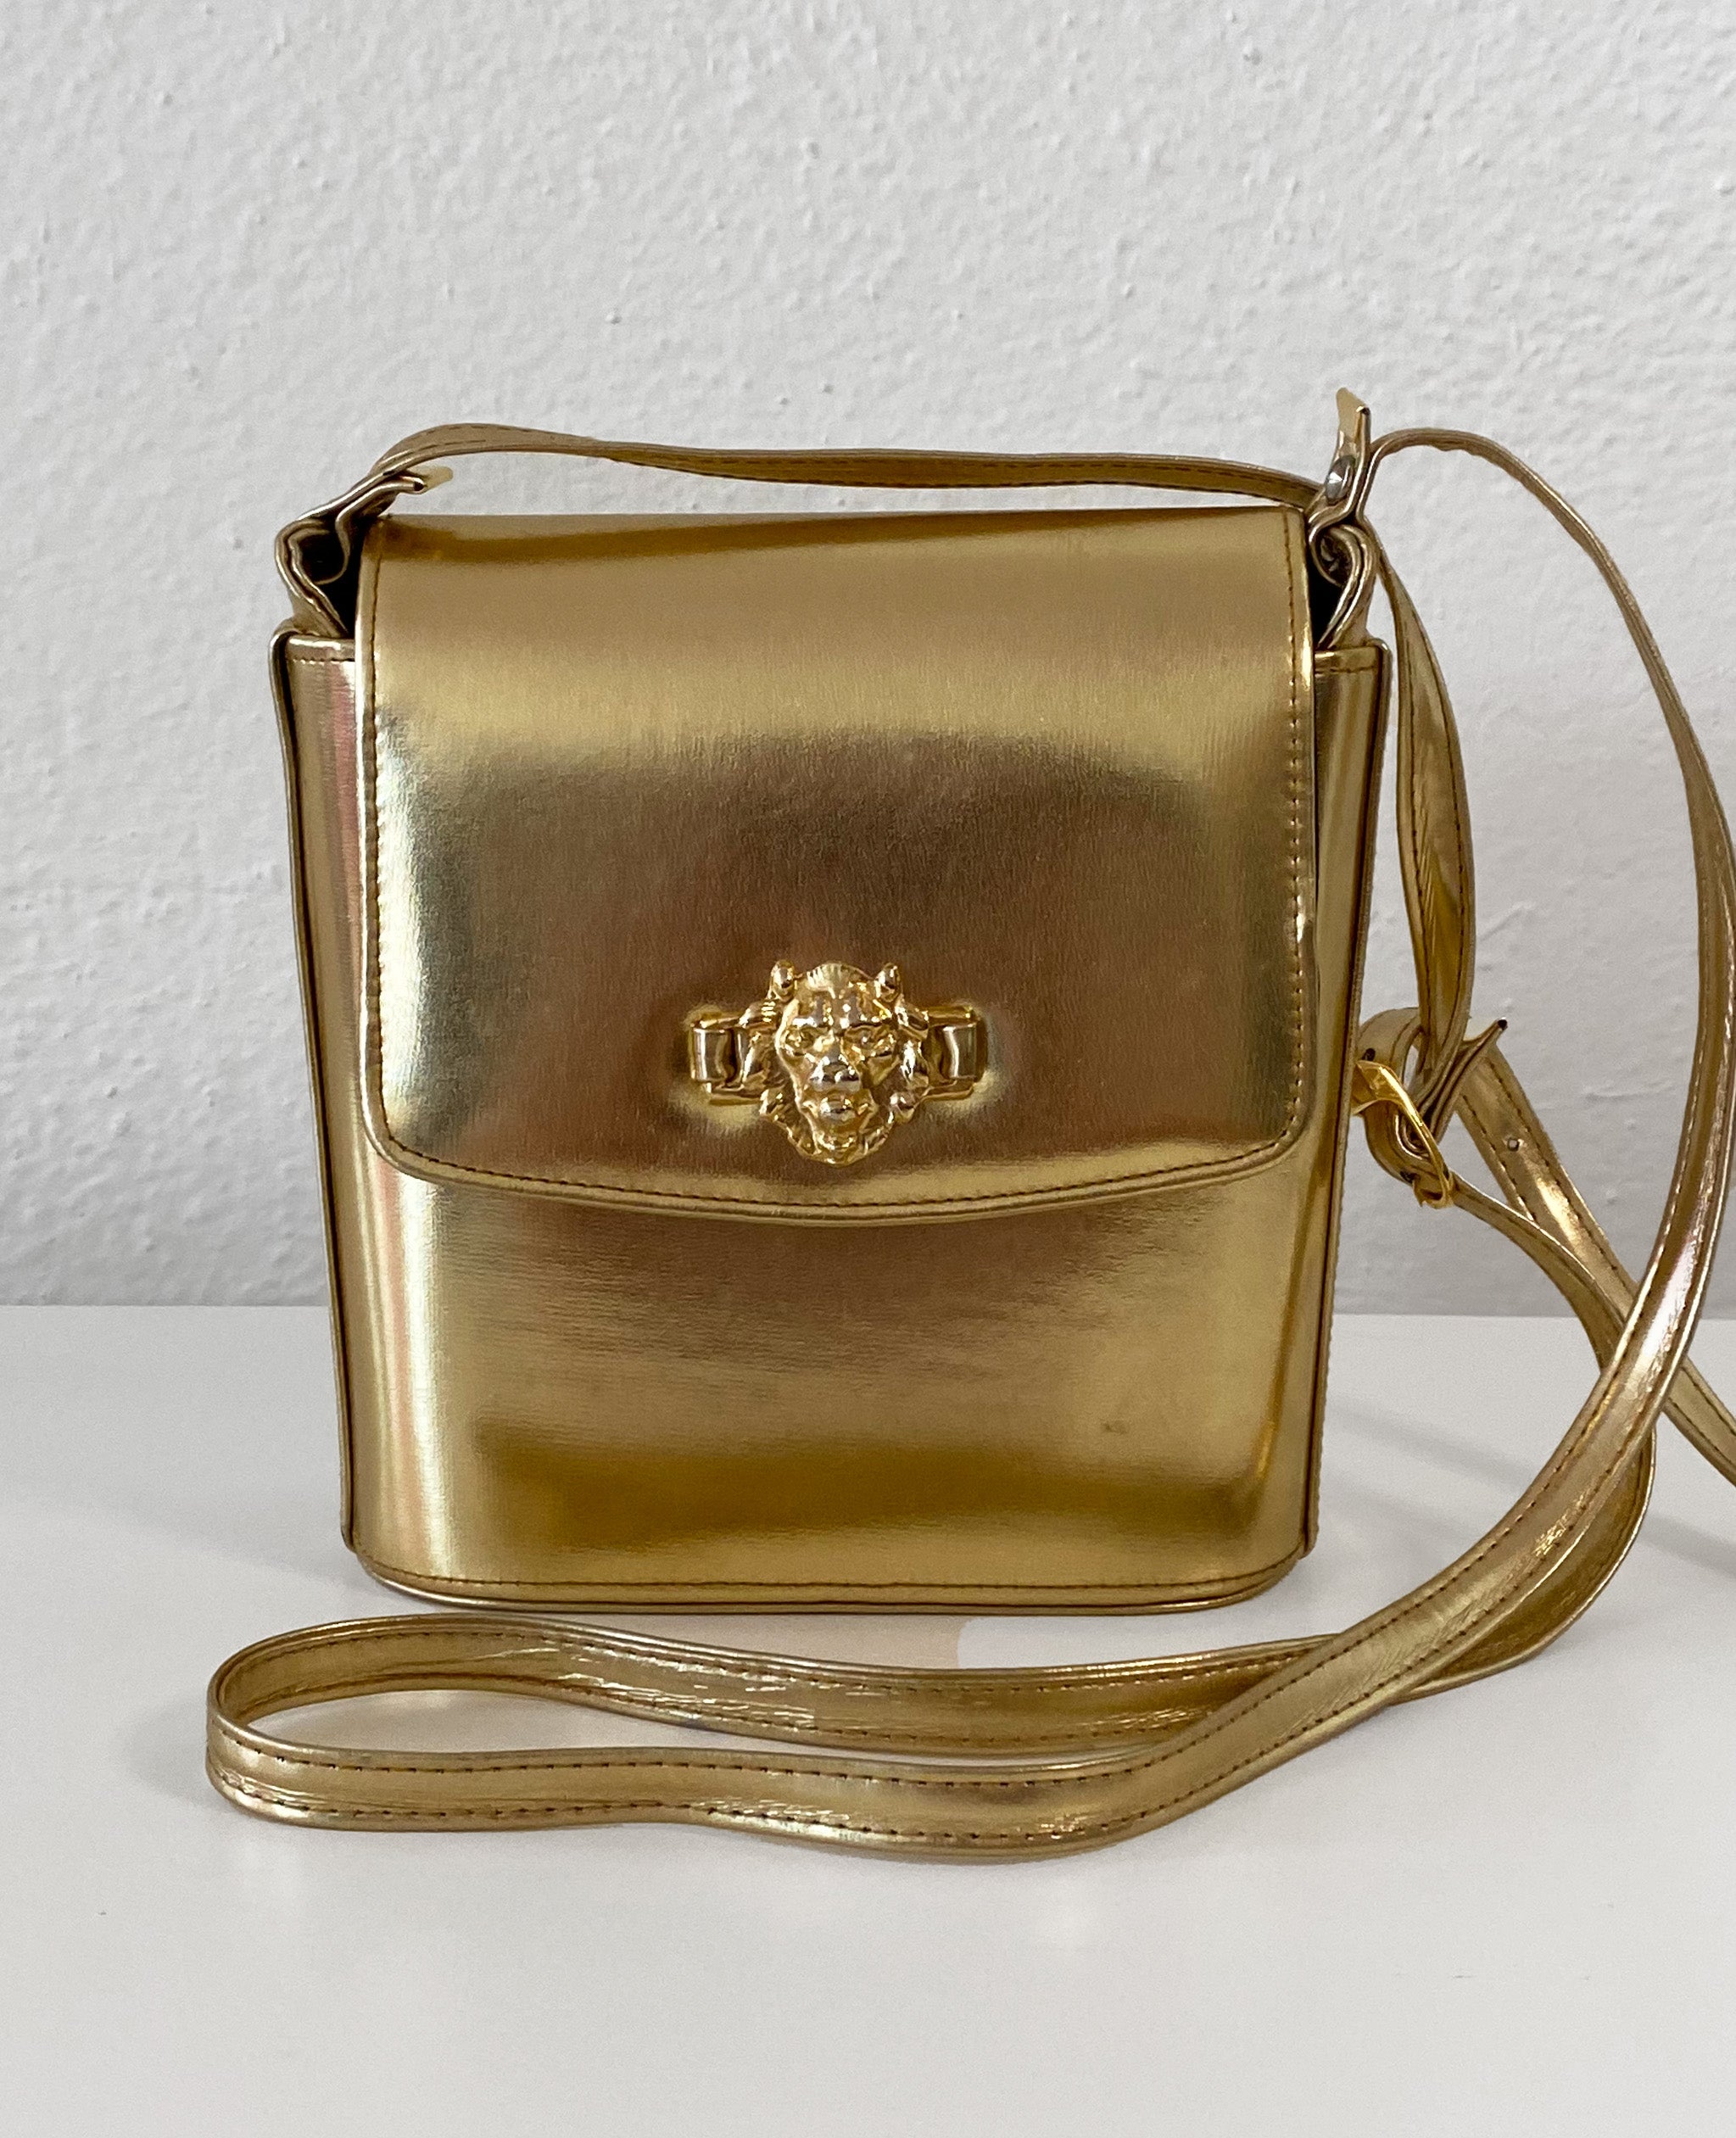 Gold Bag with Lion Detail